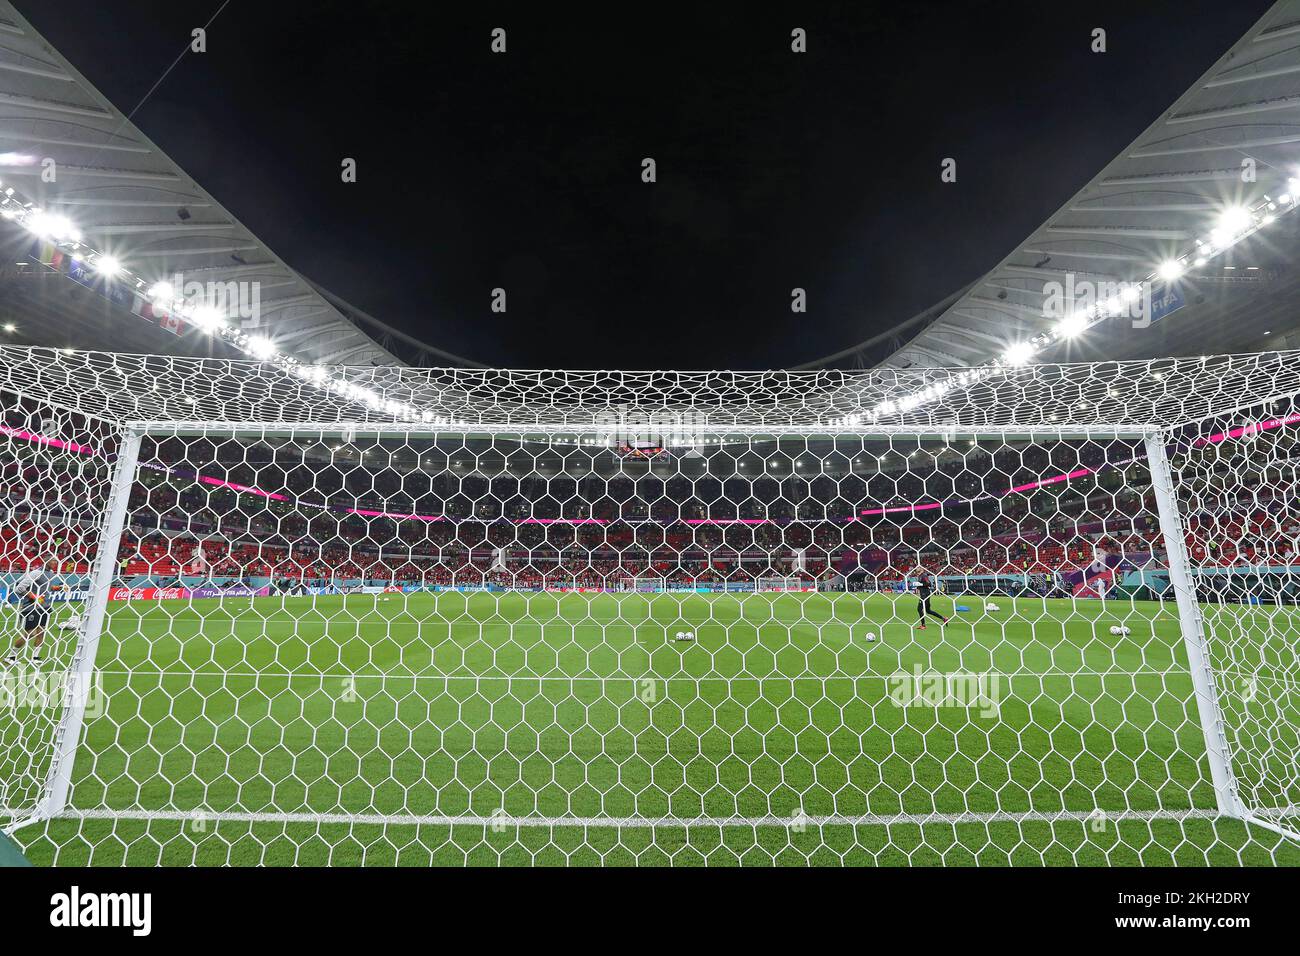 Vista do Estádio Ahmed bin Ali during the Qatar 2022 World Cup match, group F, date 1, between Belgium and Canada played at Ahmad Ben Ali Stadium on Nov 23, 2022 in Ar-Rayyan, Qatar. (Photo by PRESSINPHOTO) Stock Photo